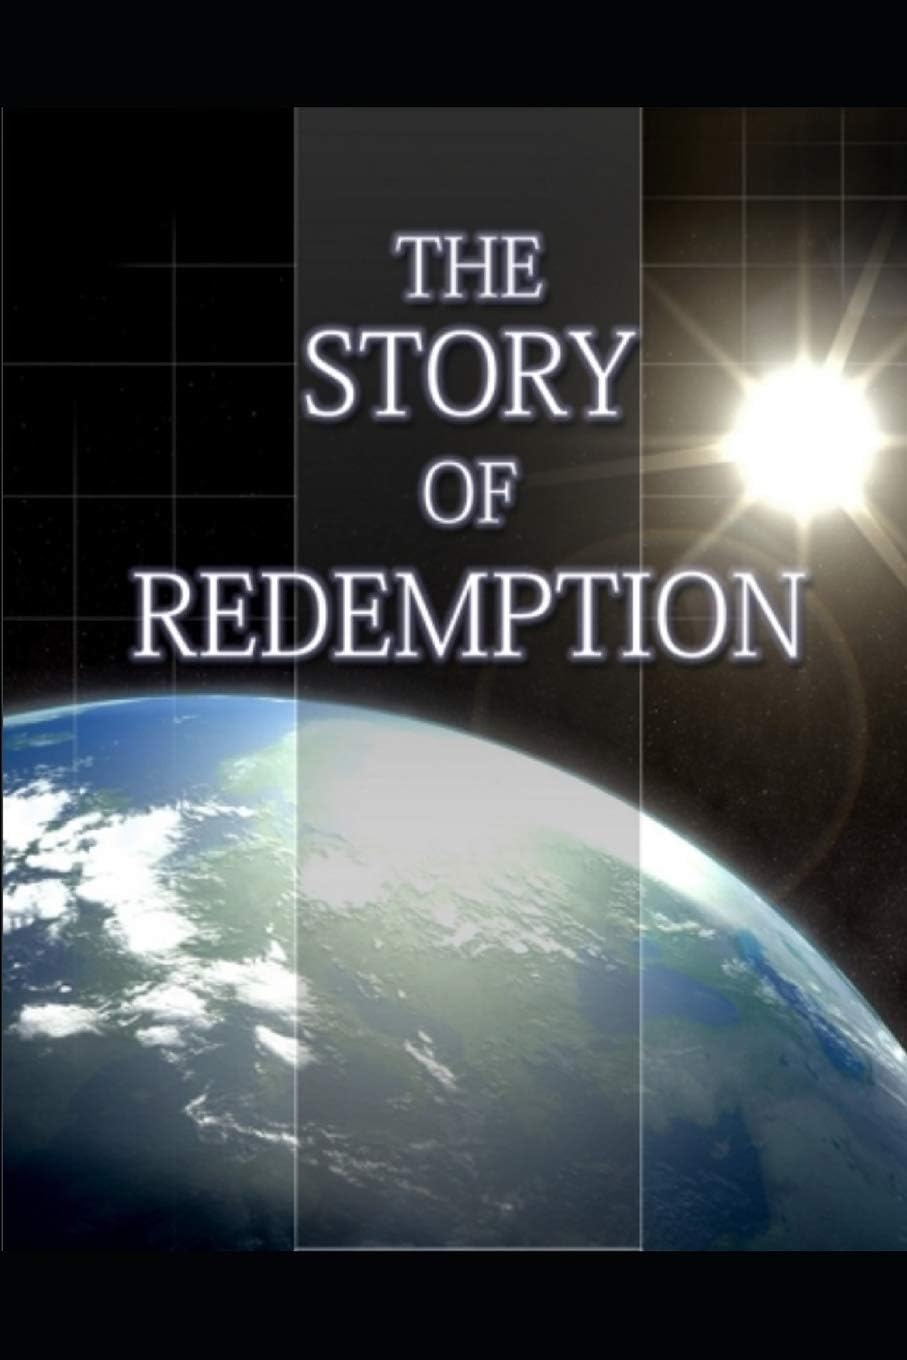 The Road to Redemption: by Ellen G. White